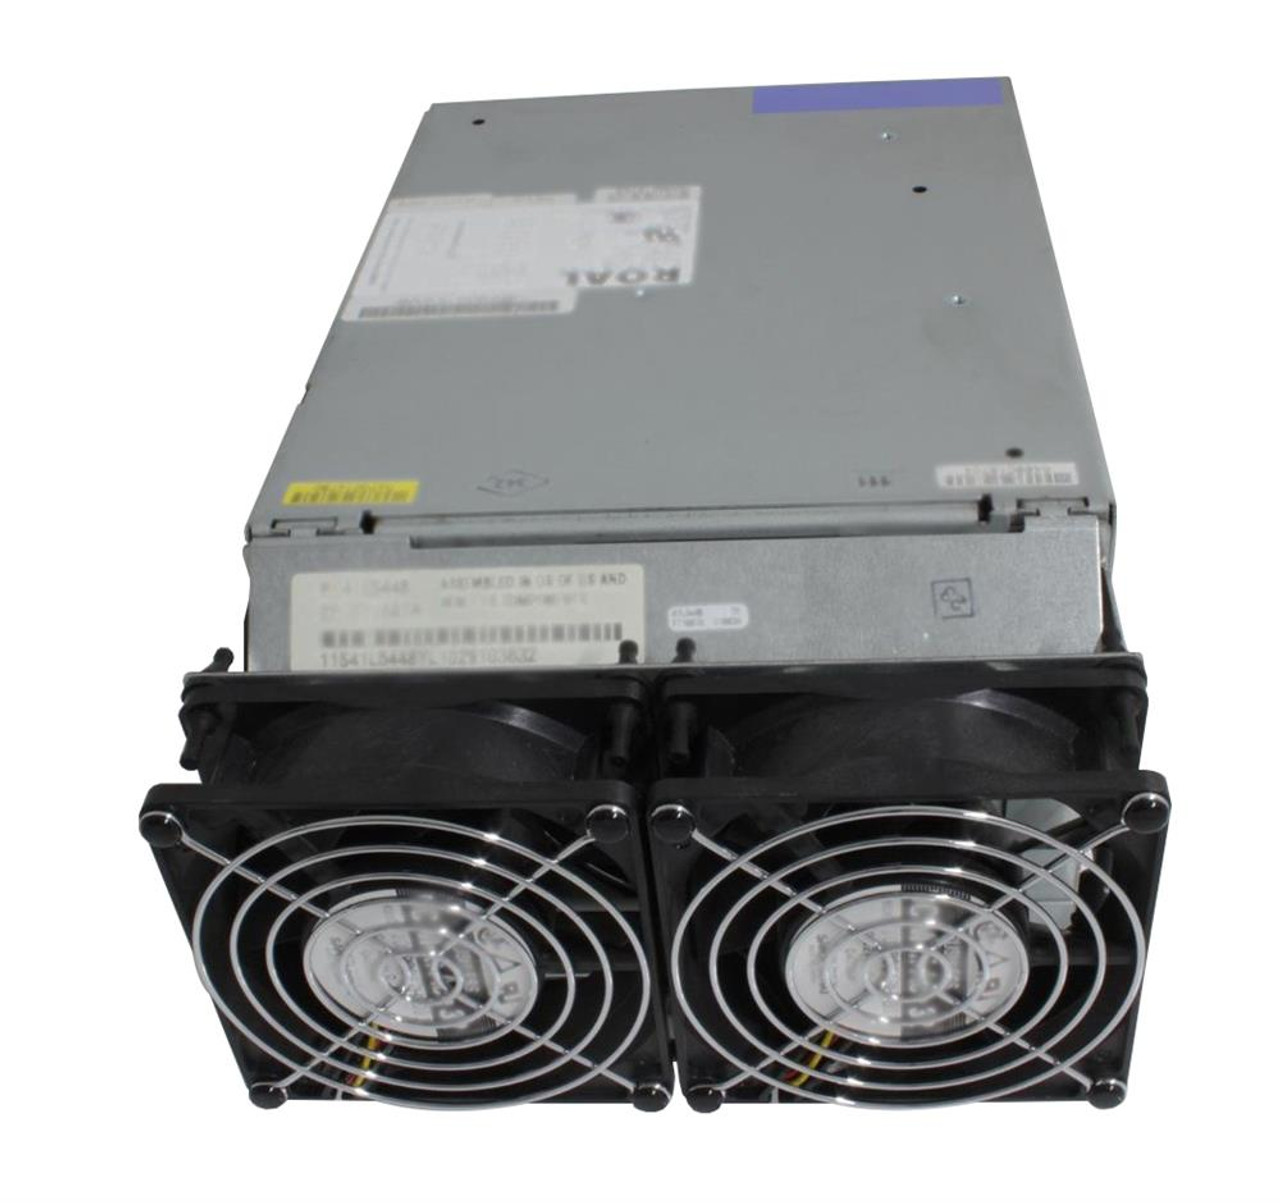 97H9337 IBM 645-Watts Power Supply for RS6000 Server